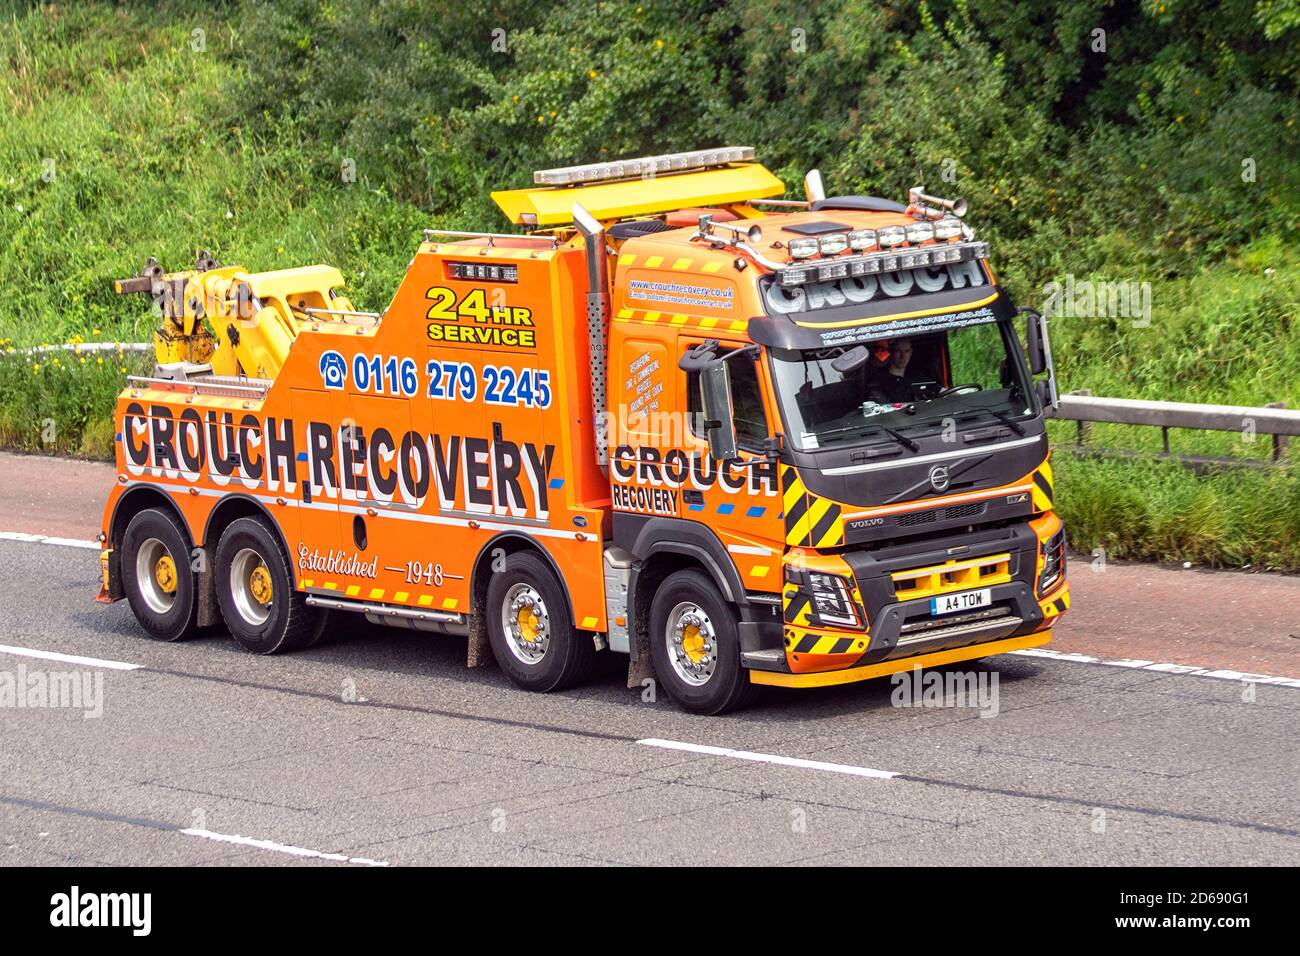 Crouch HGV tow vehicle 24hr service HGV breakdown Recovery operators; Haulage delivery trucks, lorry, transportation, emergency rescue truck, cargo carrier, Volvo vehicle, European commercial transport industry, travelling on the M61 at Manchester, UK Stock Photo